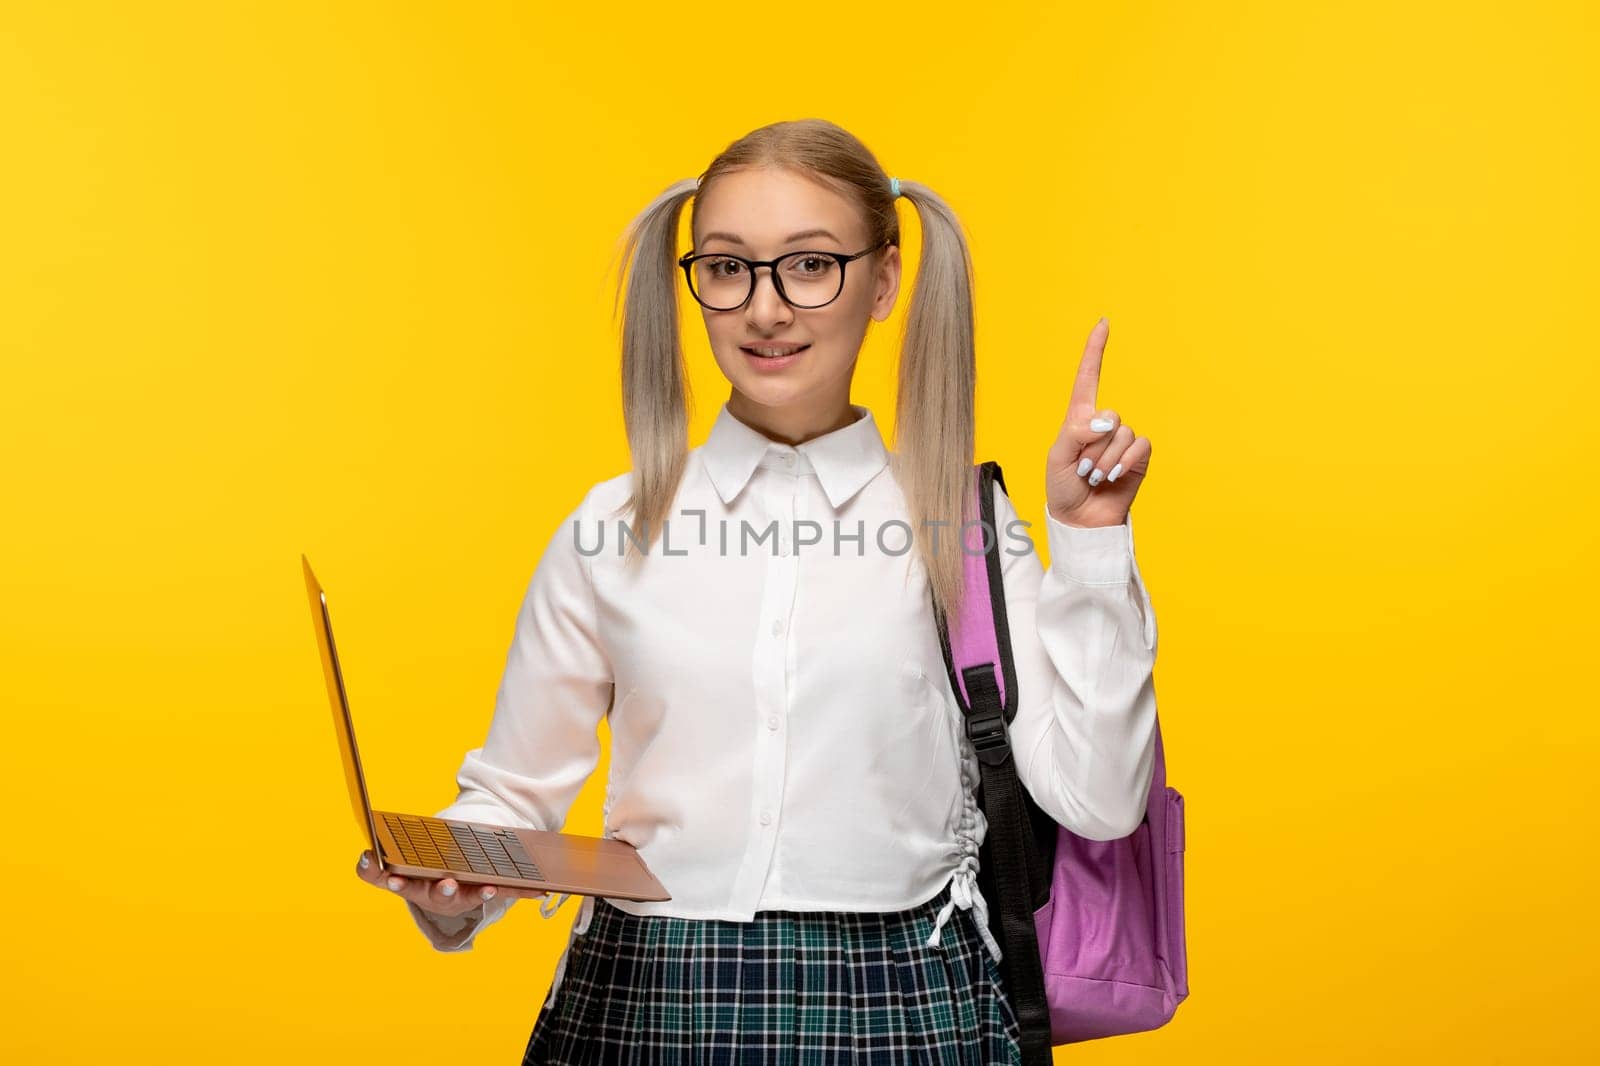 world book day excited blonde schoolgirl in uniform with pink backpack holding a computer